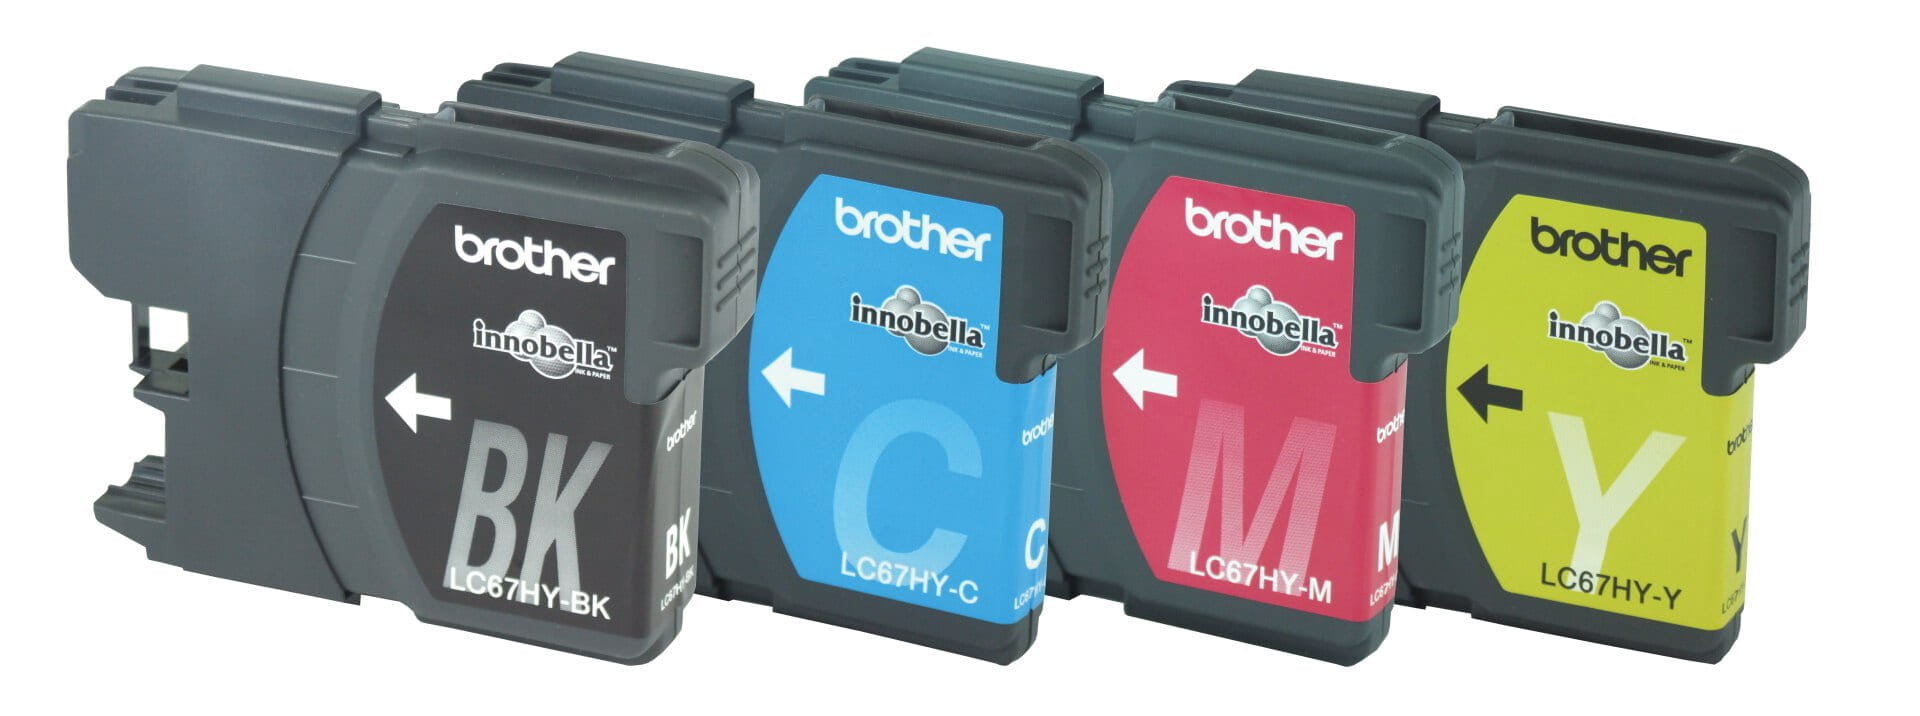 Brother inkjet printer cartridges with black, cyan, magenta and yellow ink cartridges